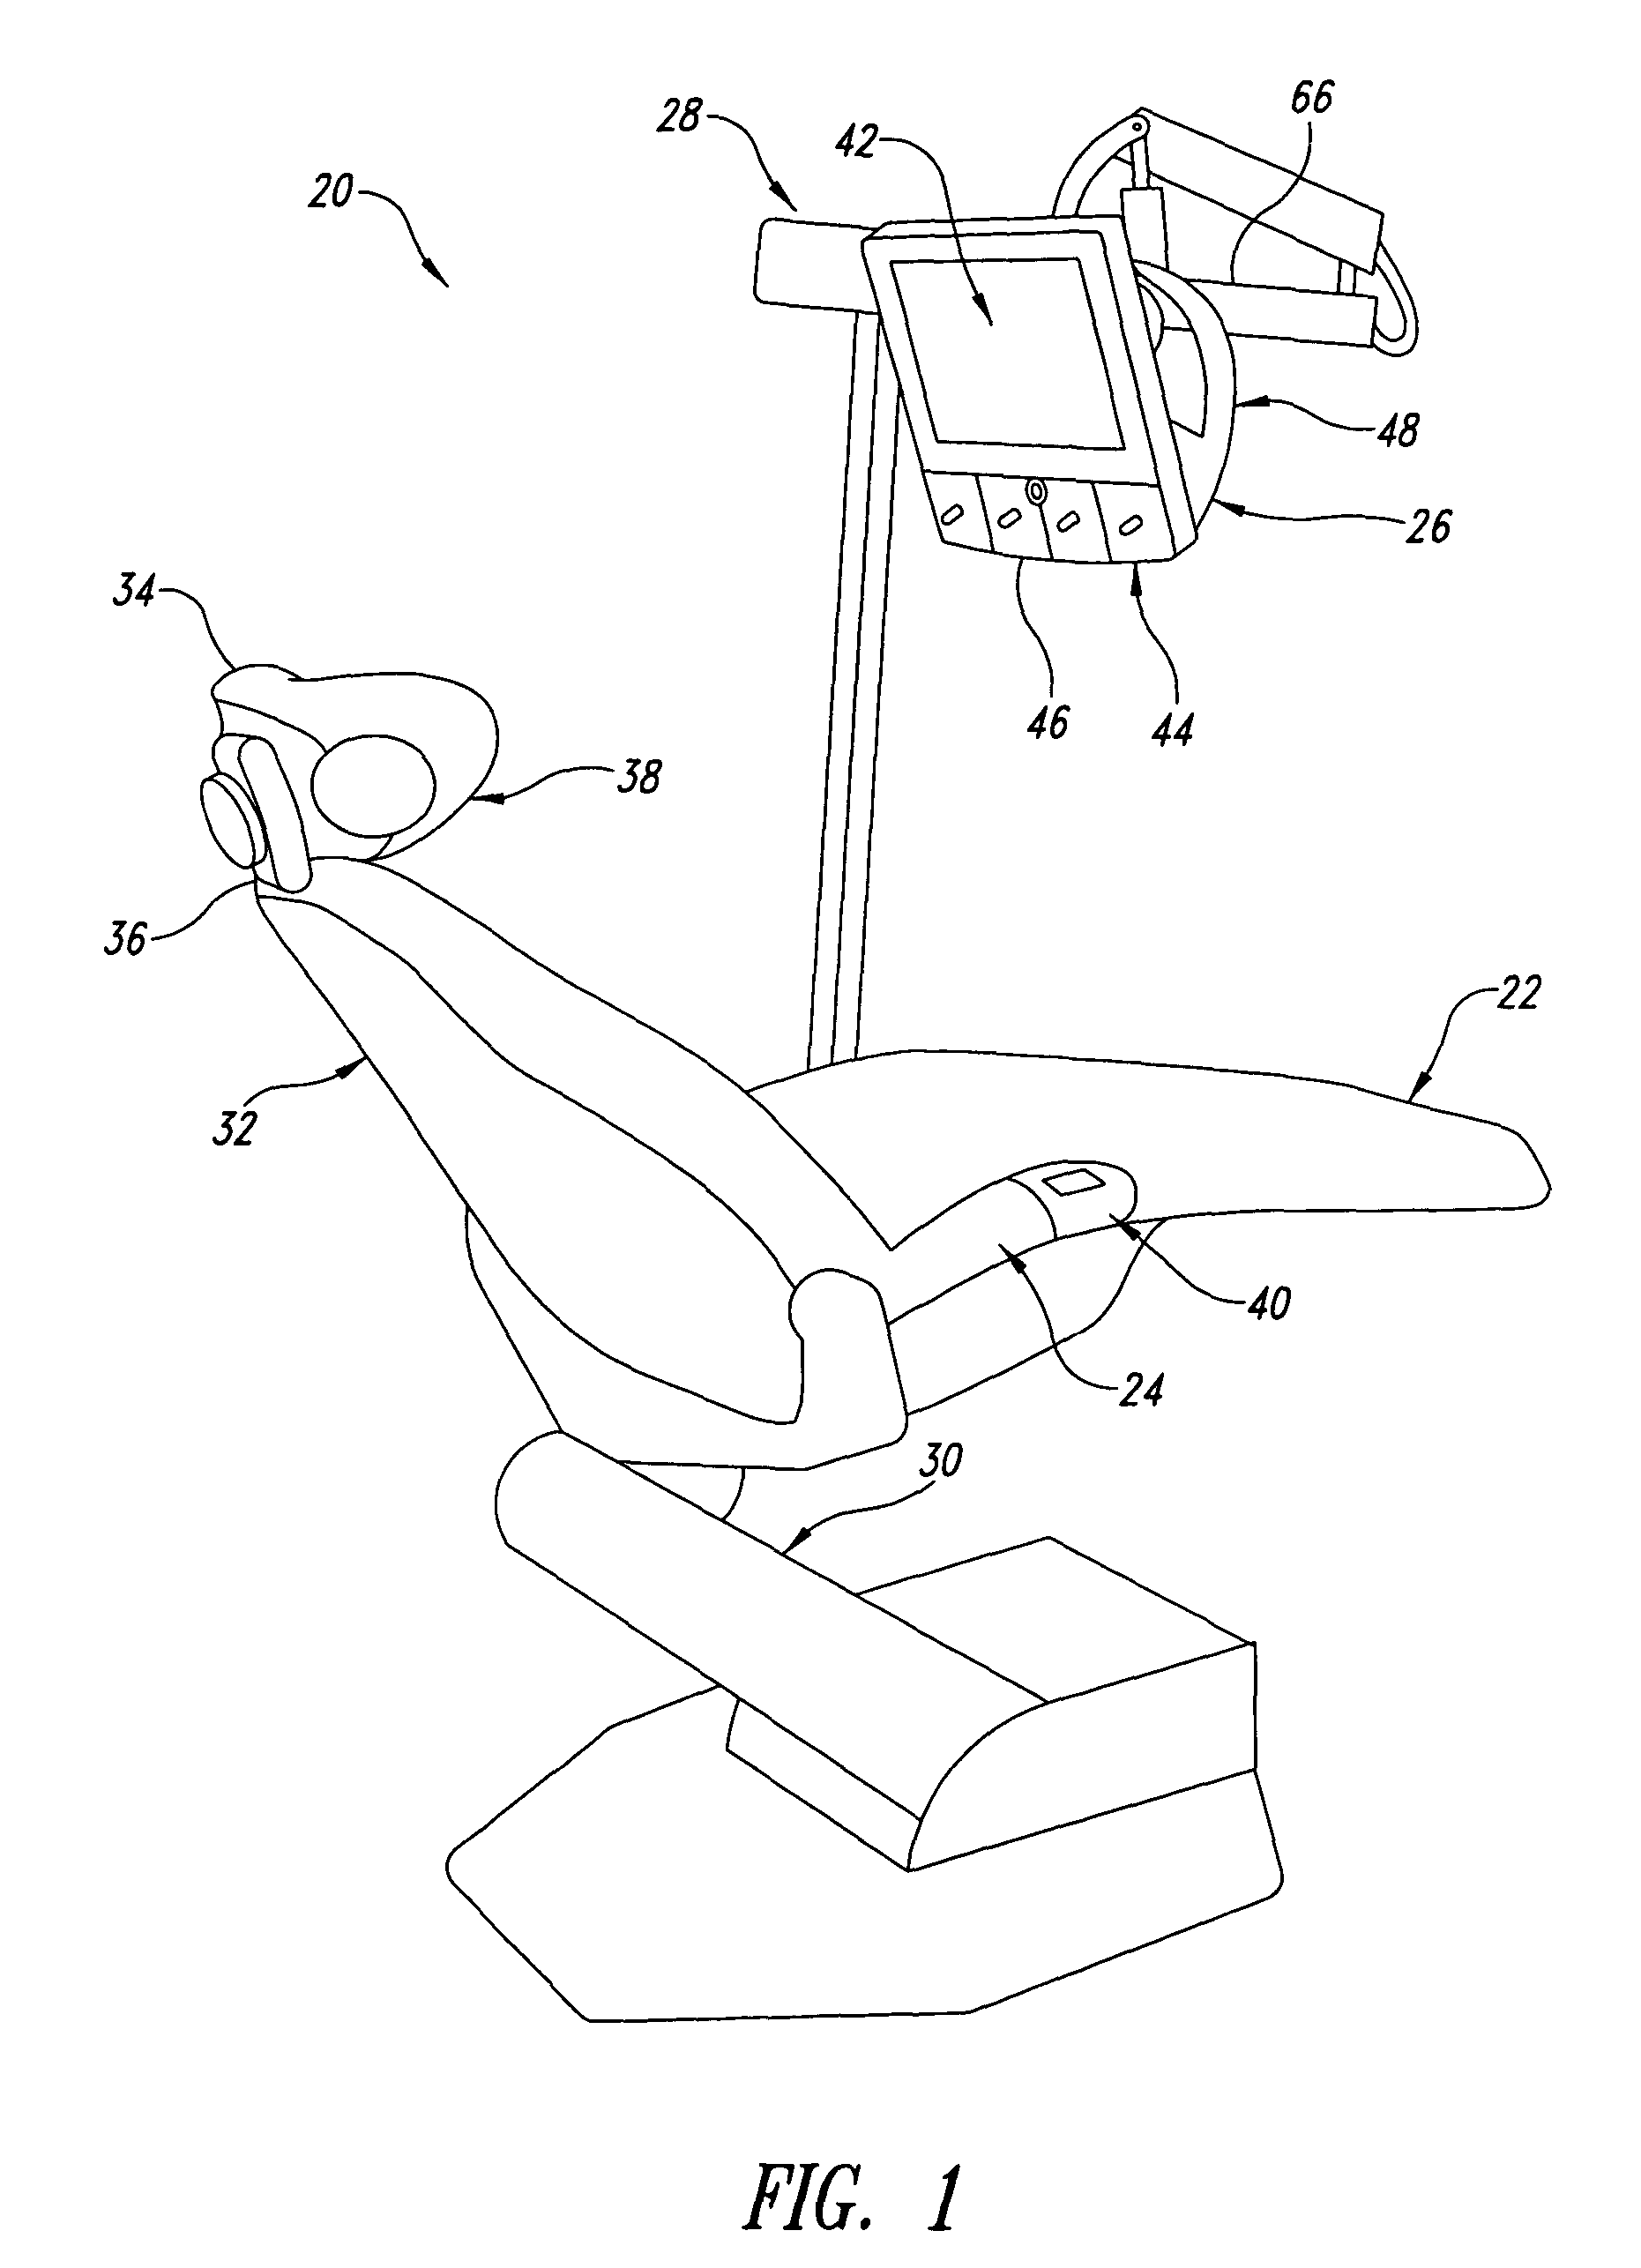 Chair-side multimedia communication system